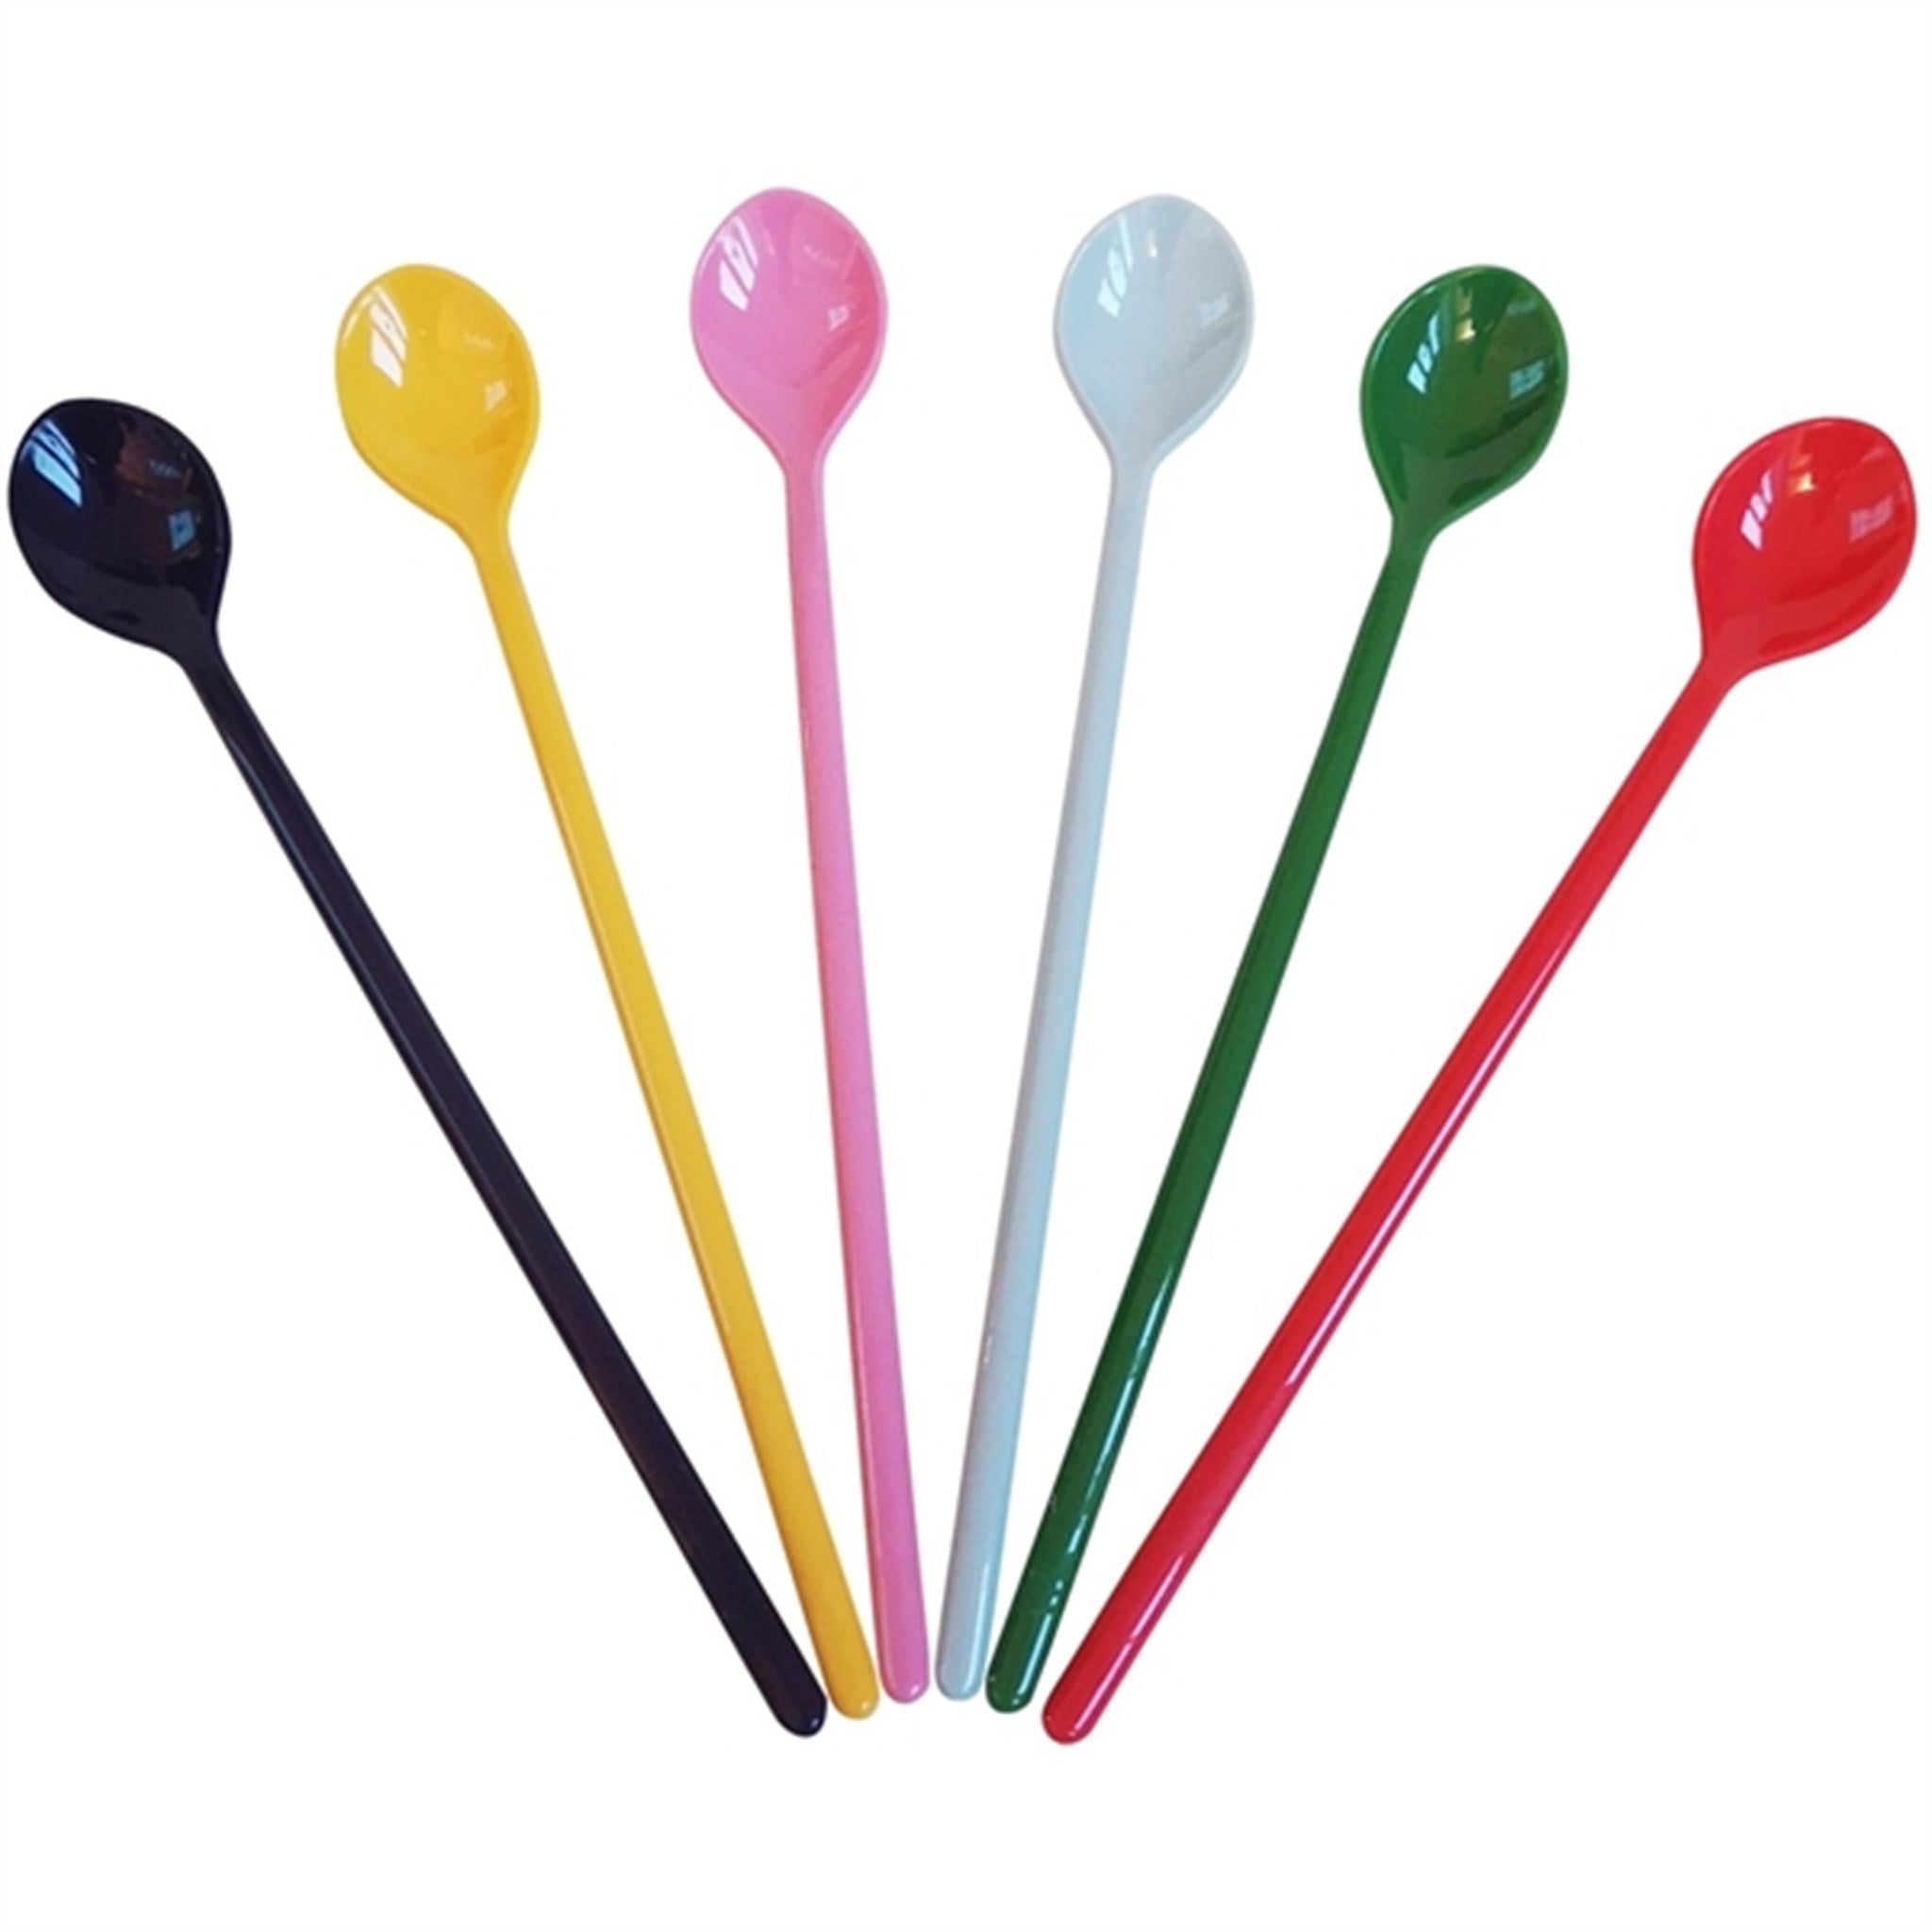 RICE Assorted Colors Melamine Latte Spoons 6-pack